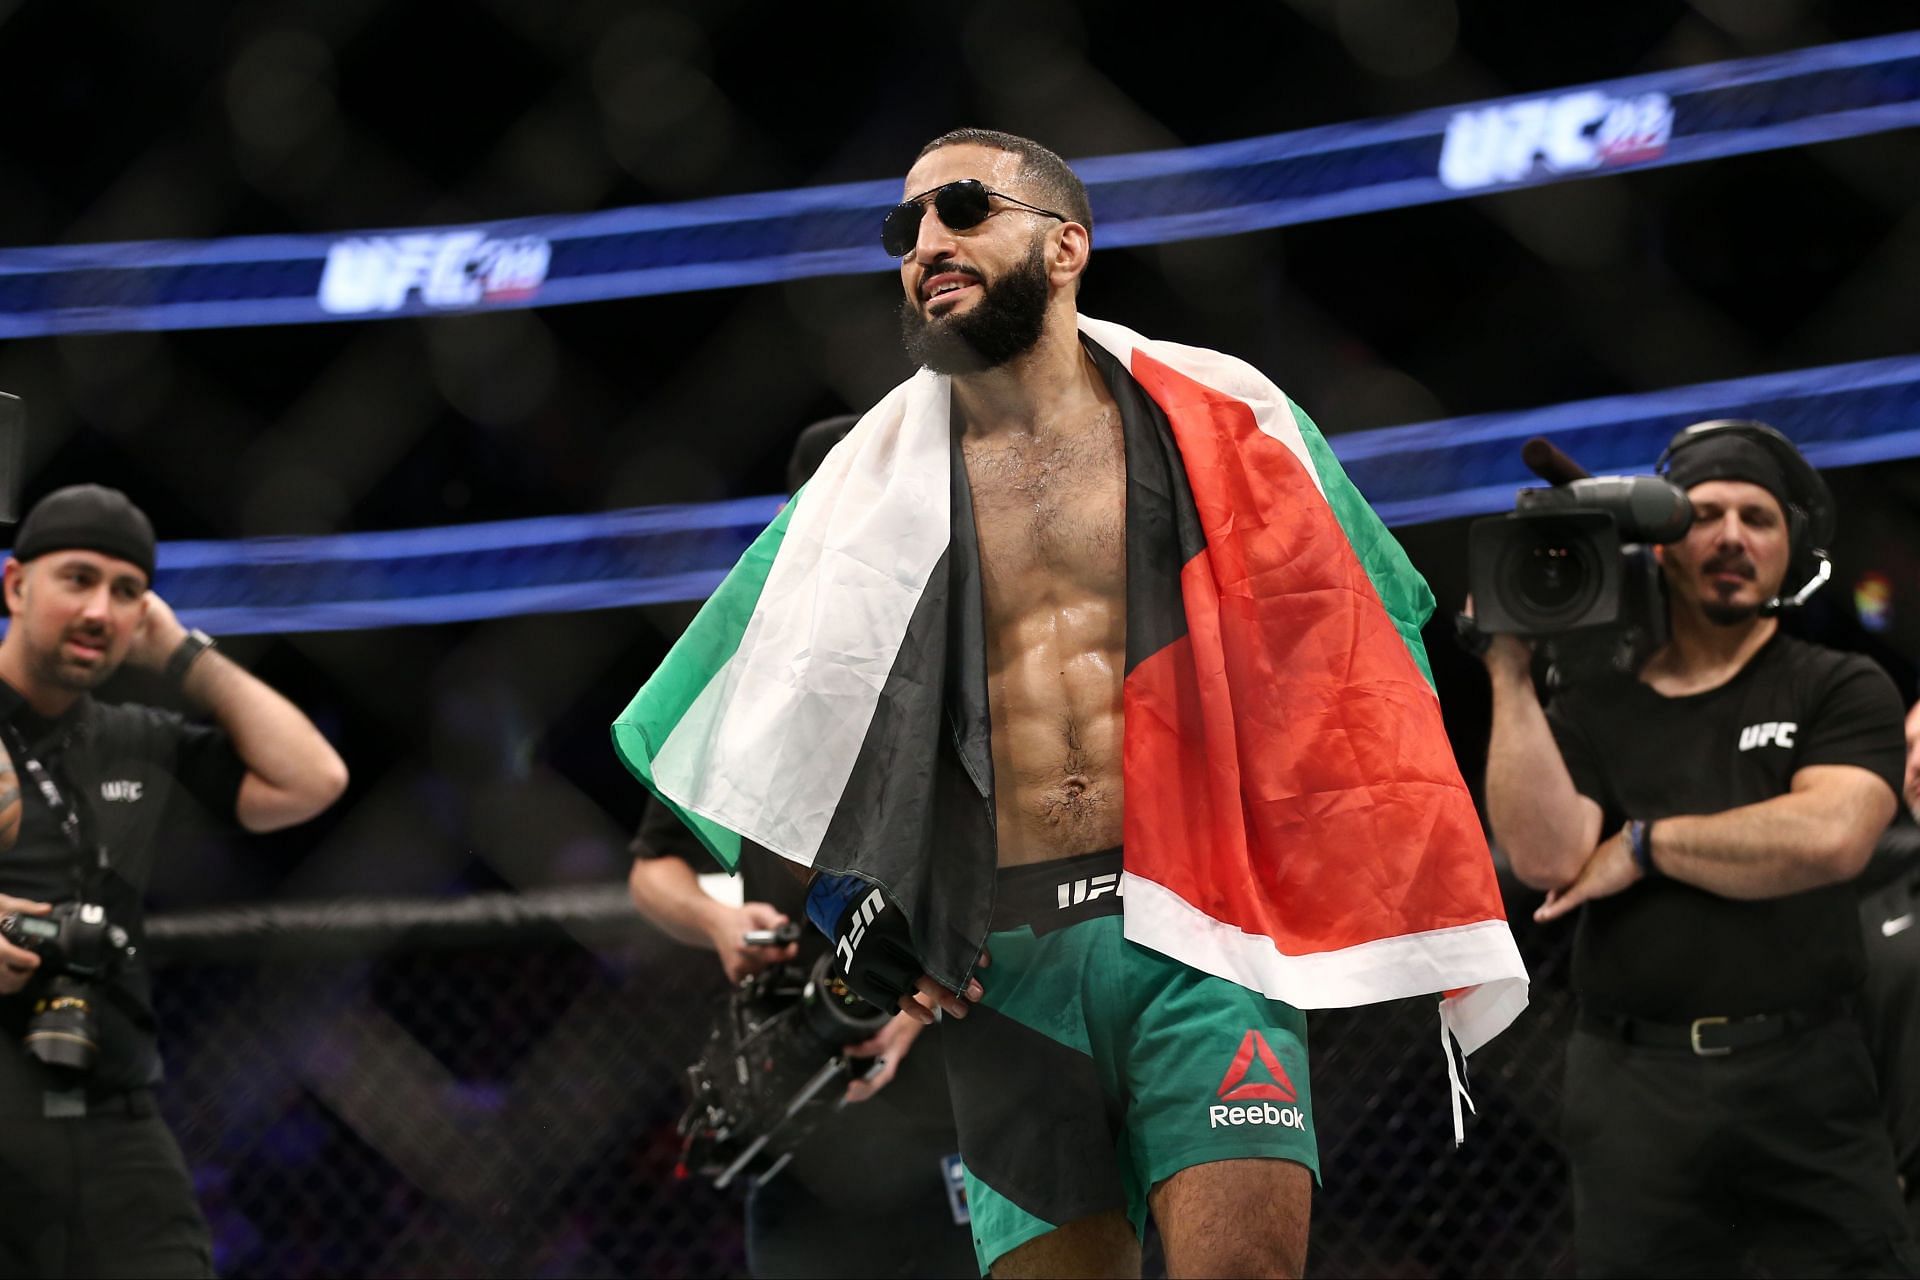 If he misses out on a title shot, the next best thing for Belal Muhammad could be a fight with Kamaru Usman